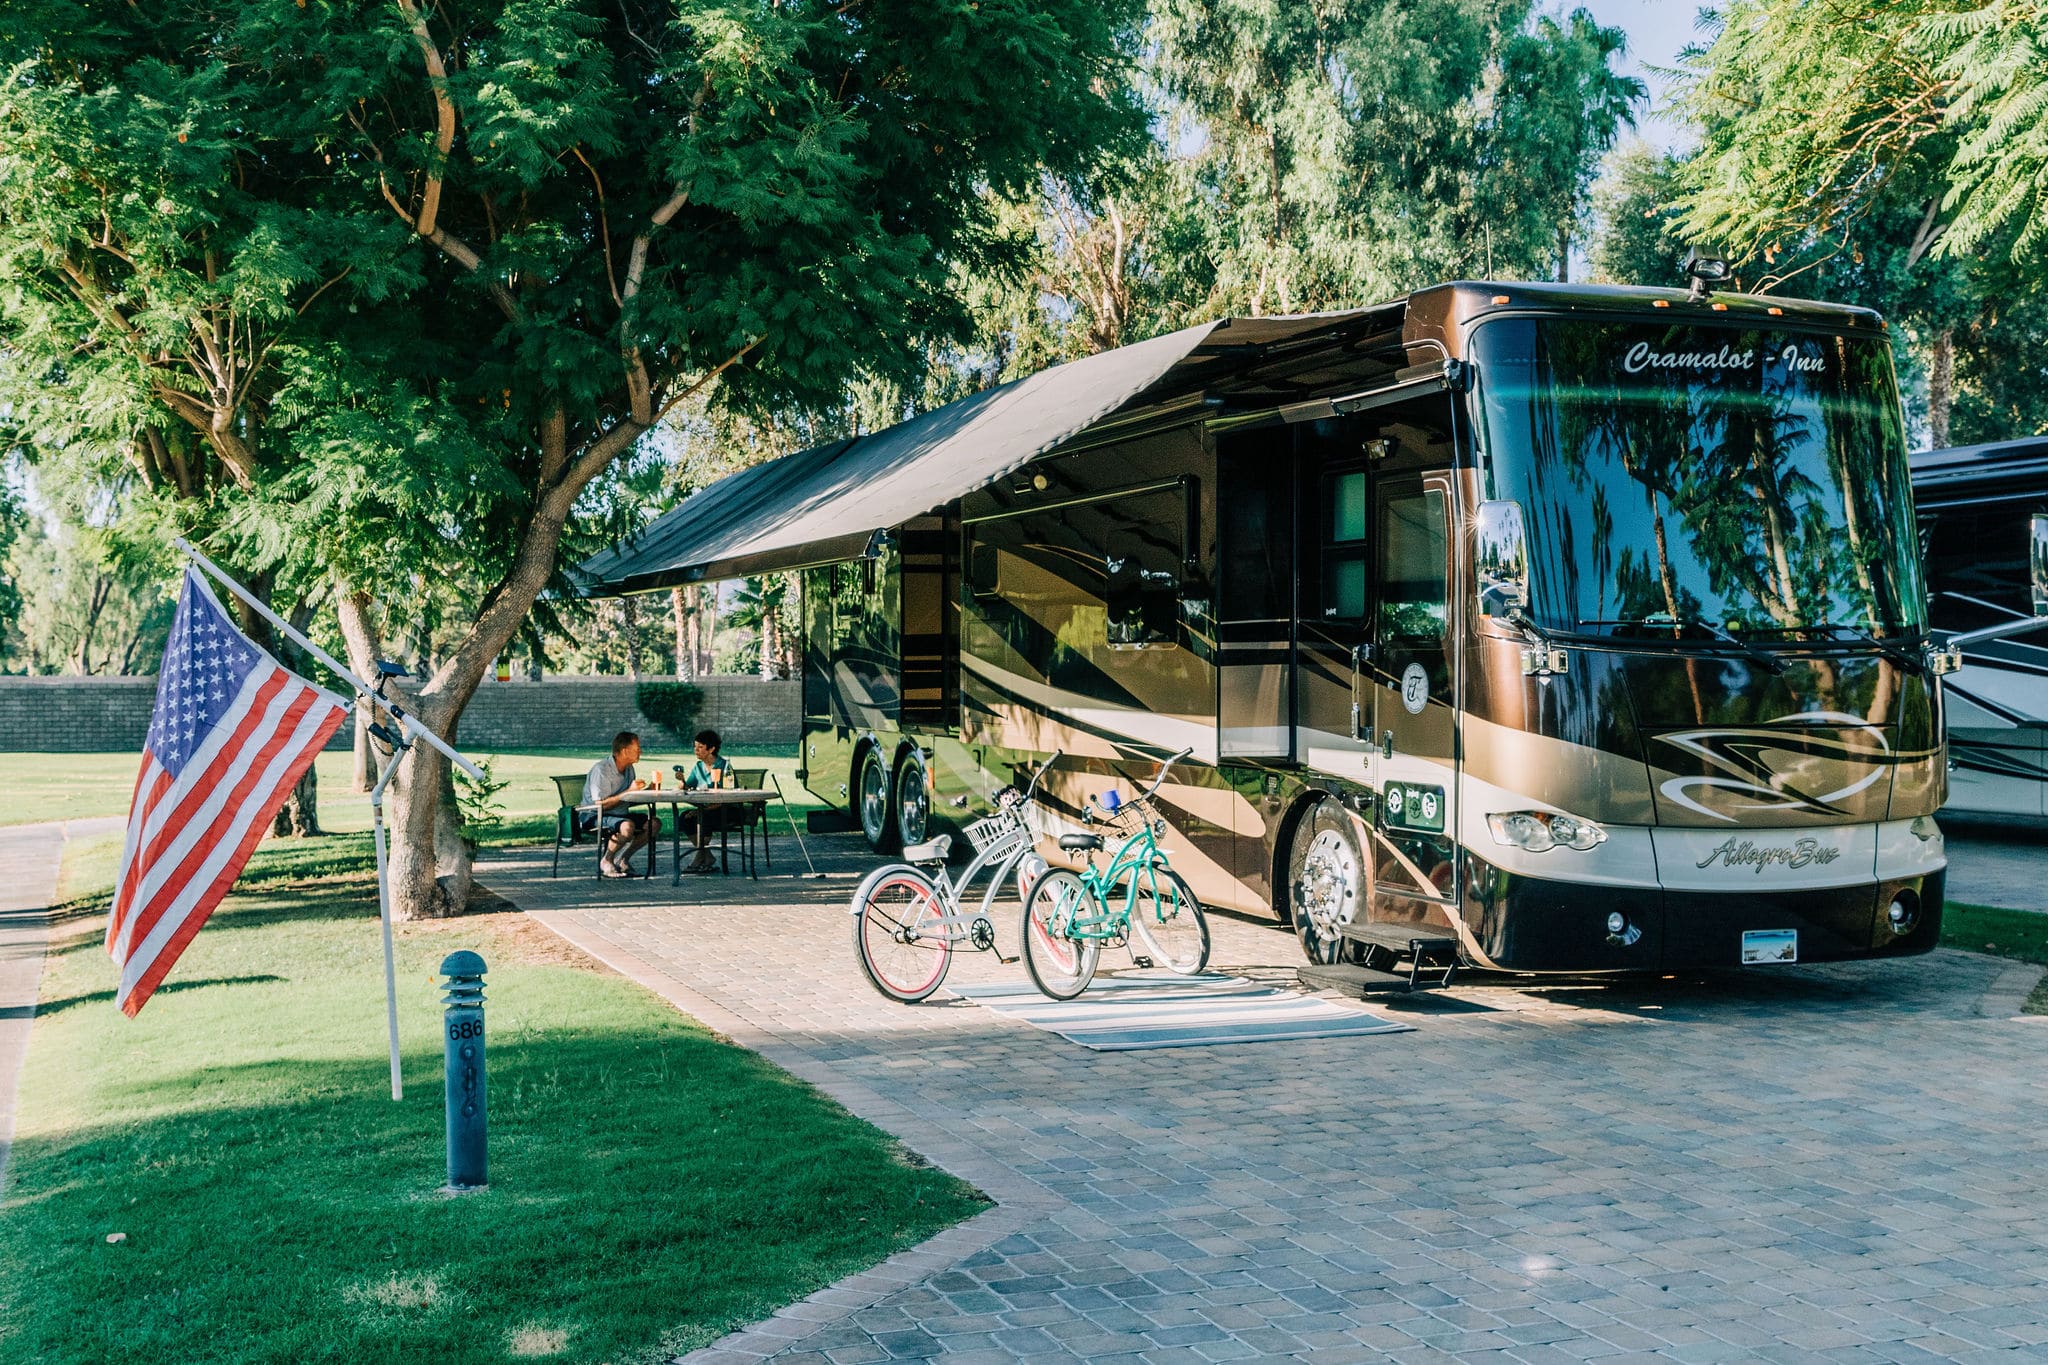 A motorhome with awning on a brick-paved site.